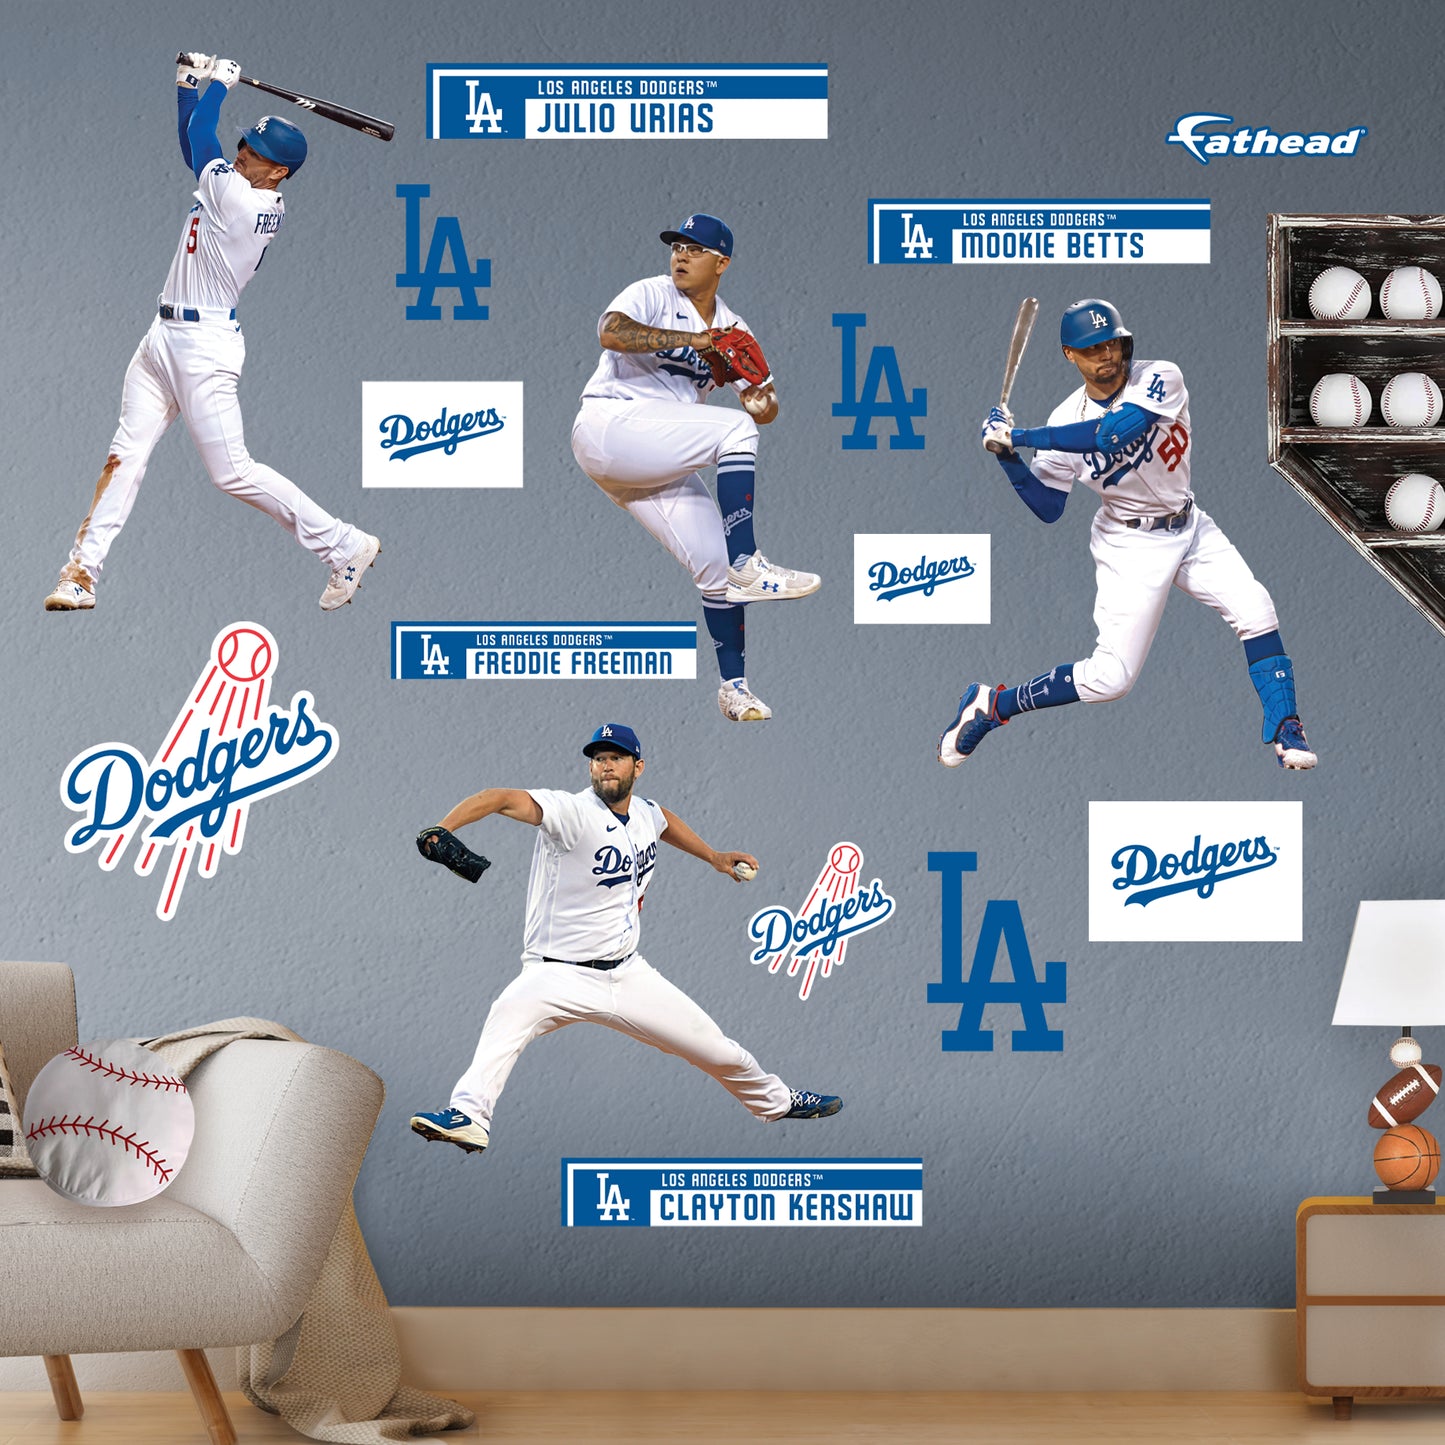 Los Angeles Dodgers: Freddie Freeman, Mookie Betts, Clayton Kershaw and Julio Ur√≠as Team Collection - Officially Licensed MLB Removable Adhesive Decal